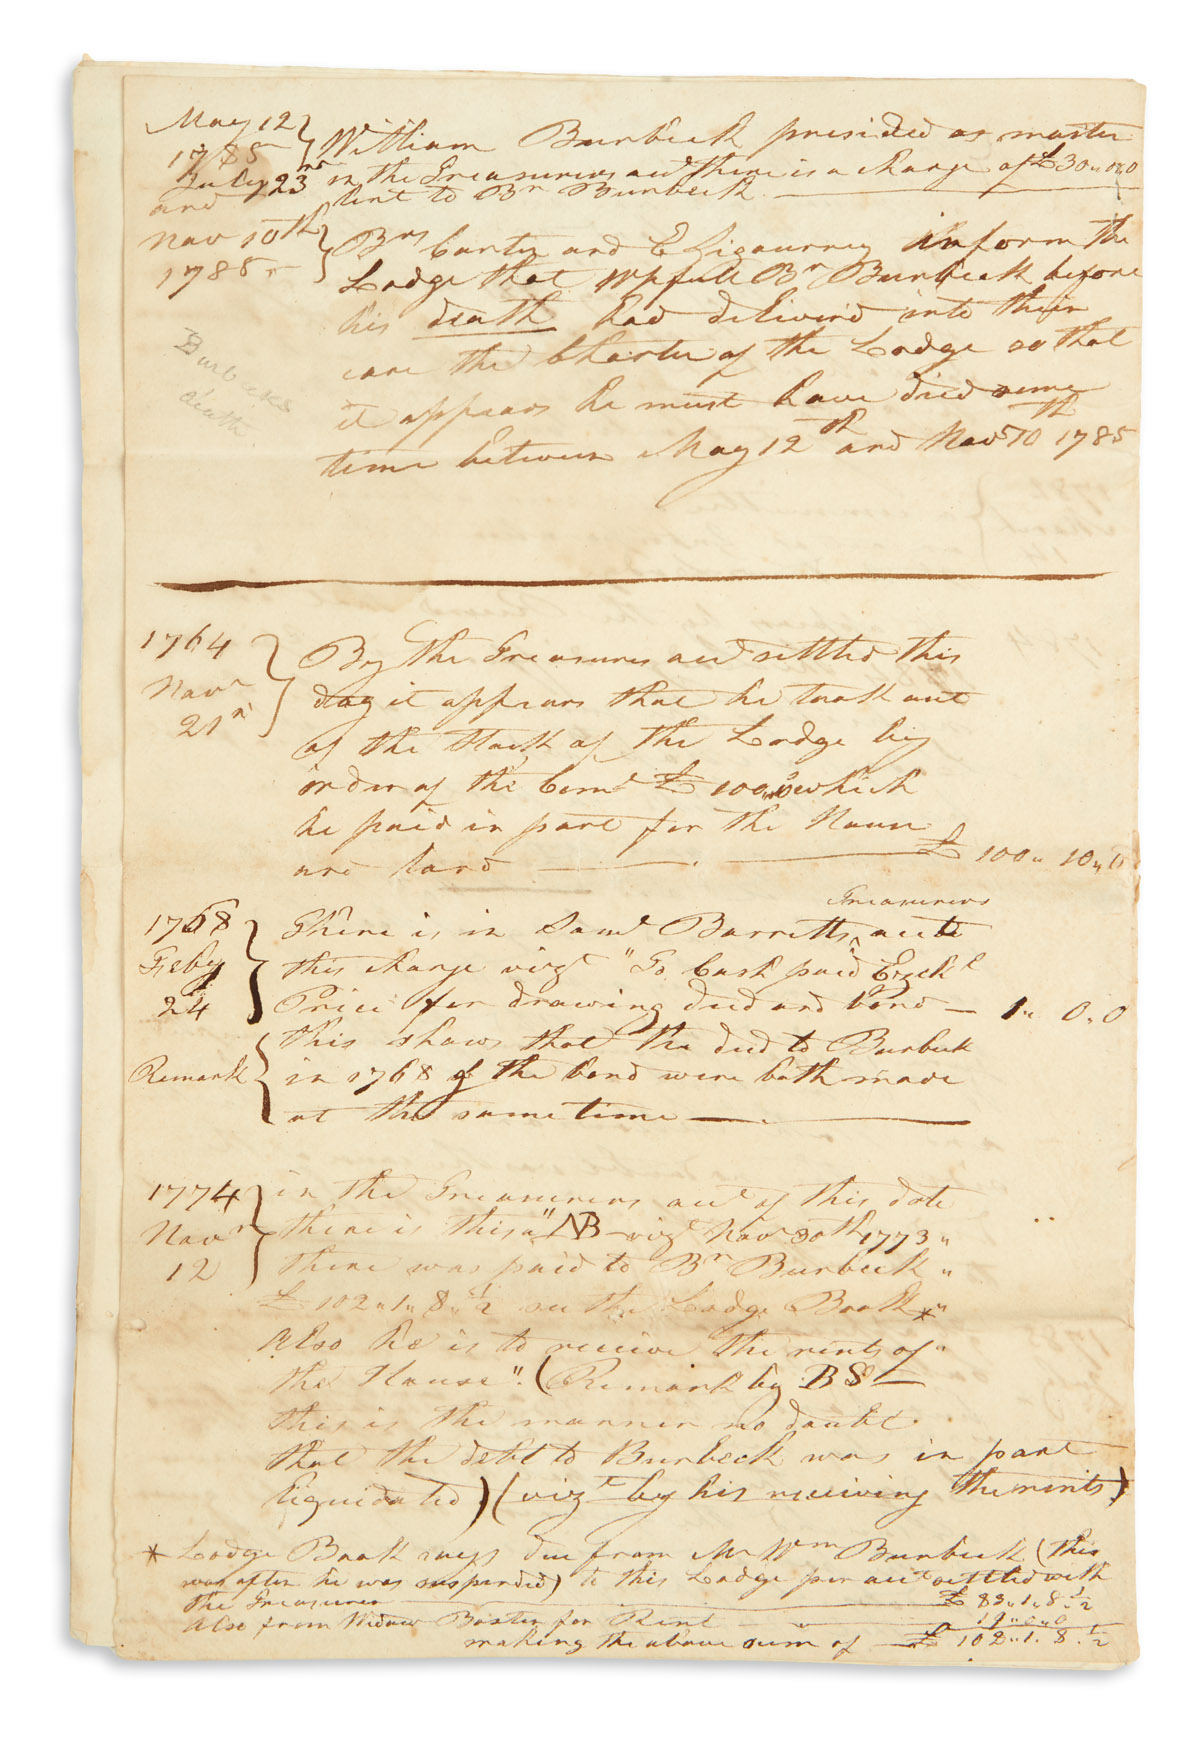 (AMERICAN REVOLUTION--PRELUDE.) Manuscript notes on St. Andrews Masonic Lodge of Boston, and its famous Green Dragon Tavern.